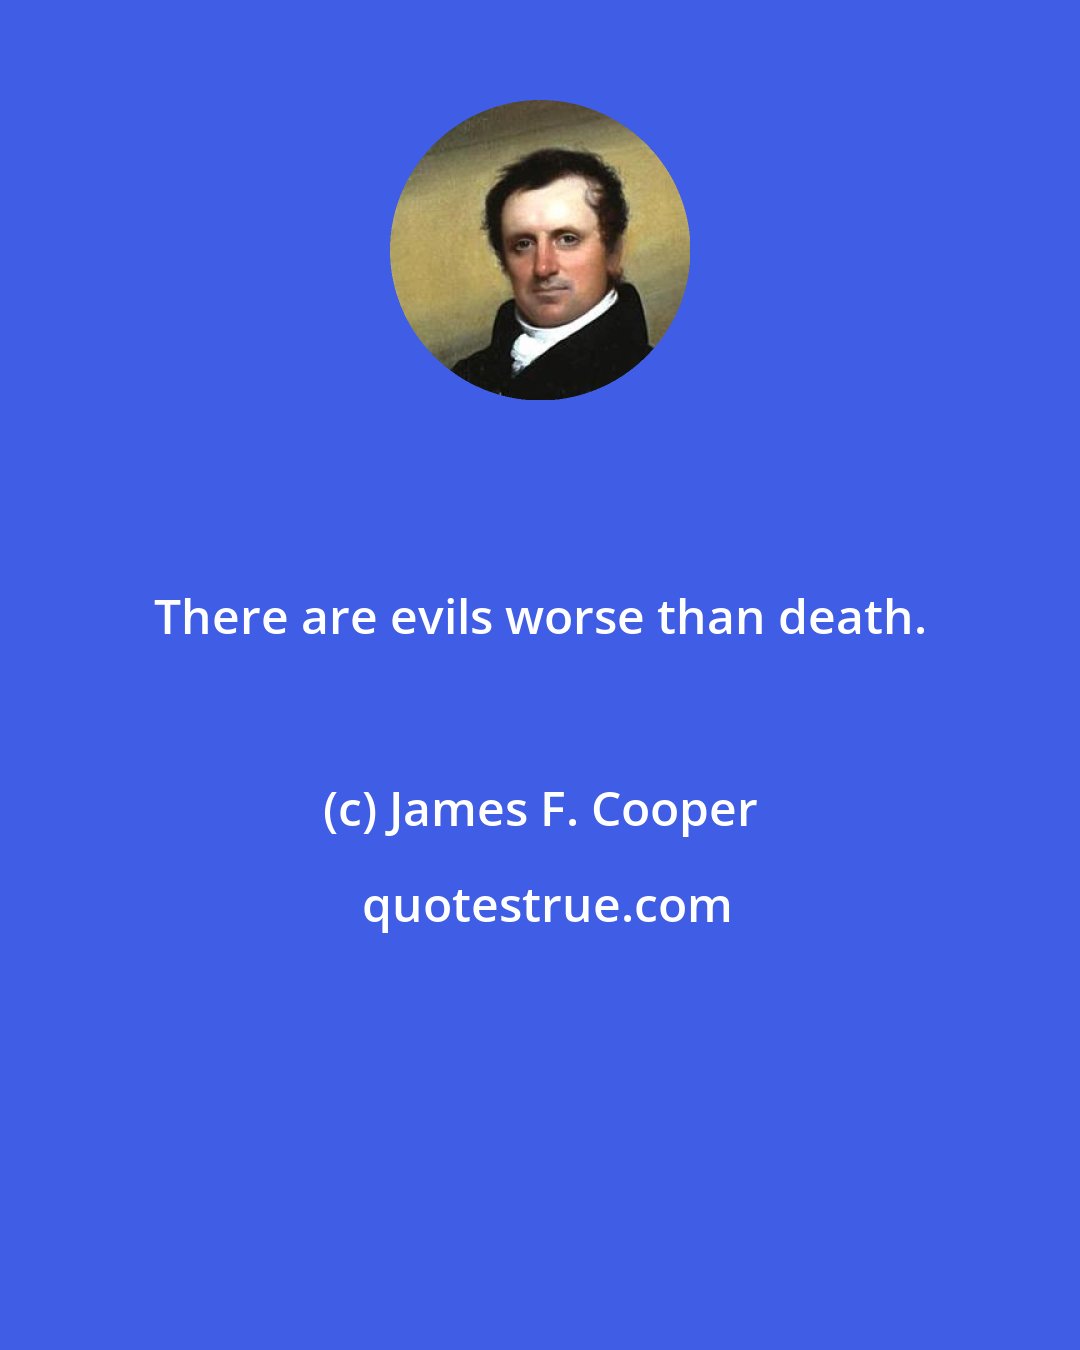 James F. Cooper: There are evils worse than death.